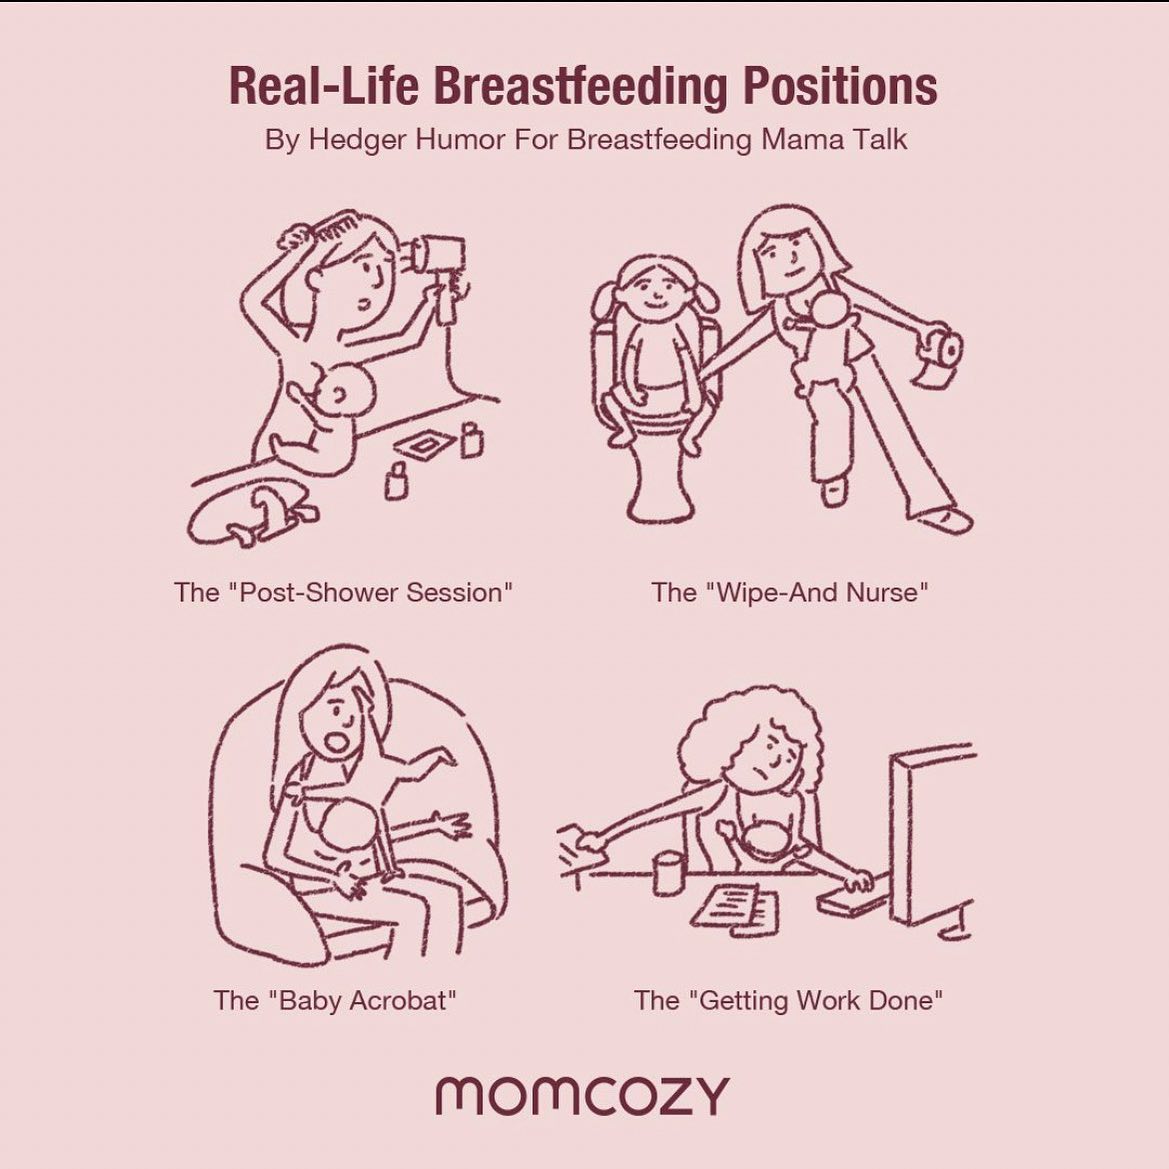 Hey Mama, which breastfeeding position do you rock?
A.🚿👶
B.🤱🧻
C.🤸‍♂️😂
D.💻🍼
E. All of the above 😂

#Momcozy #BeACozyMom #CozyCare #momcozymoments #breastfeedingpositions #breastfeedingmoms #breastfeedingmemes #breastfeedinglife #momlife #breastfeedingmama #breastfeedingmommy